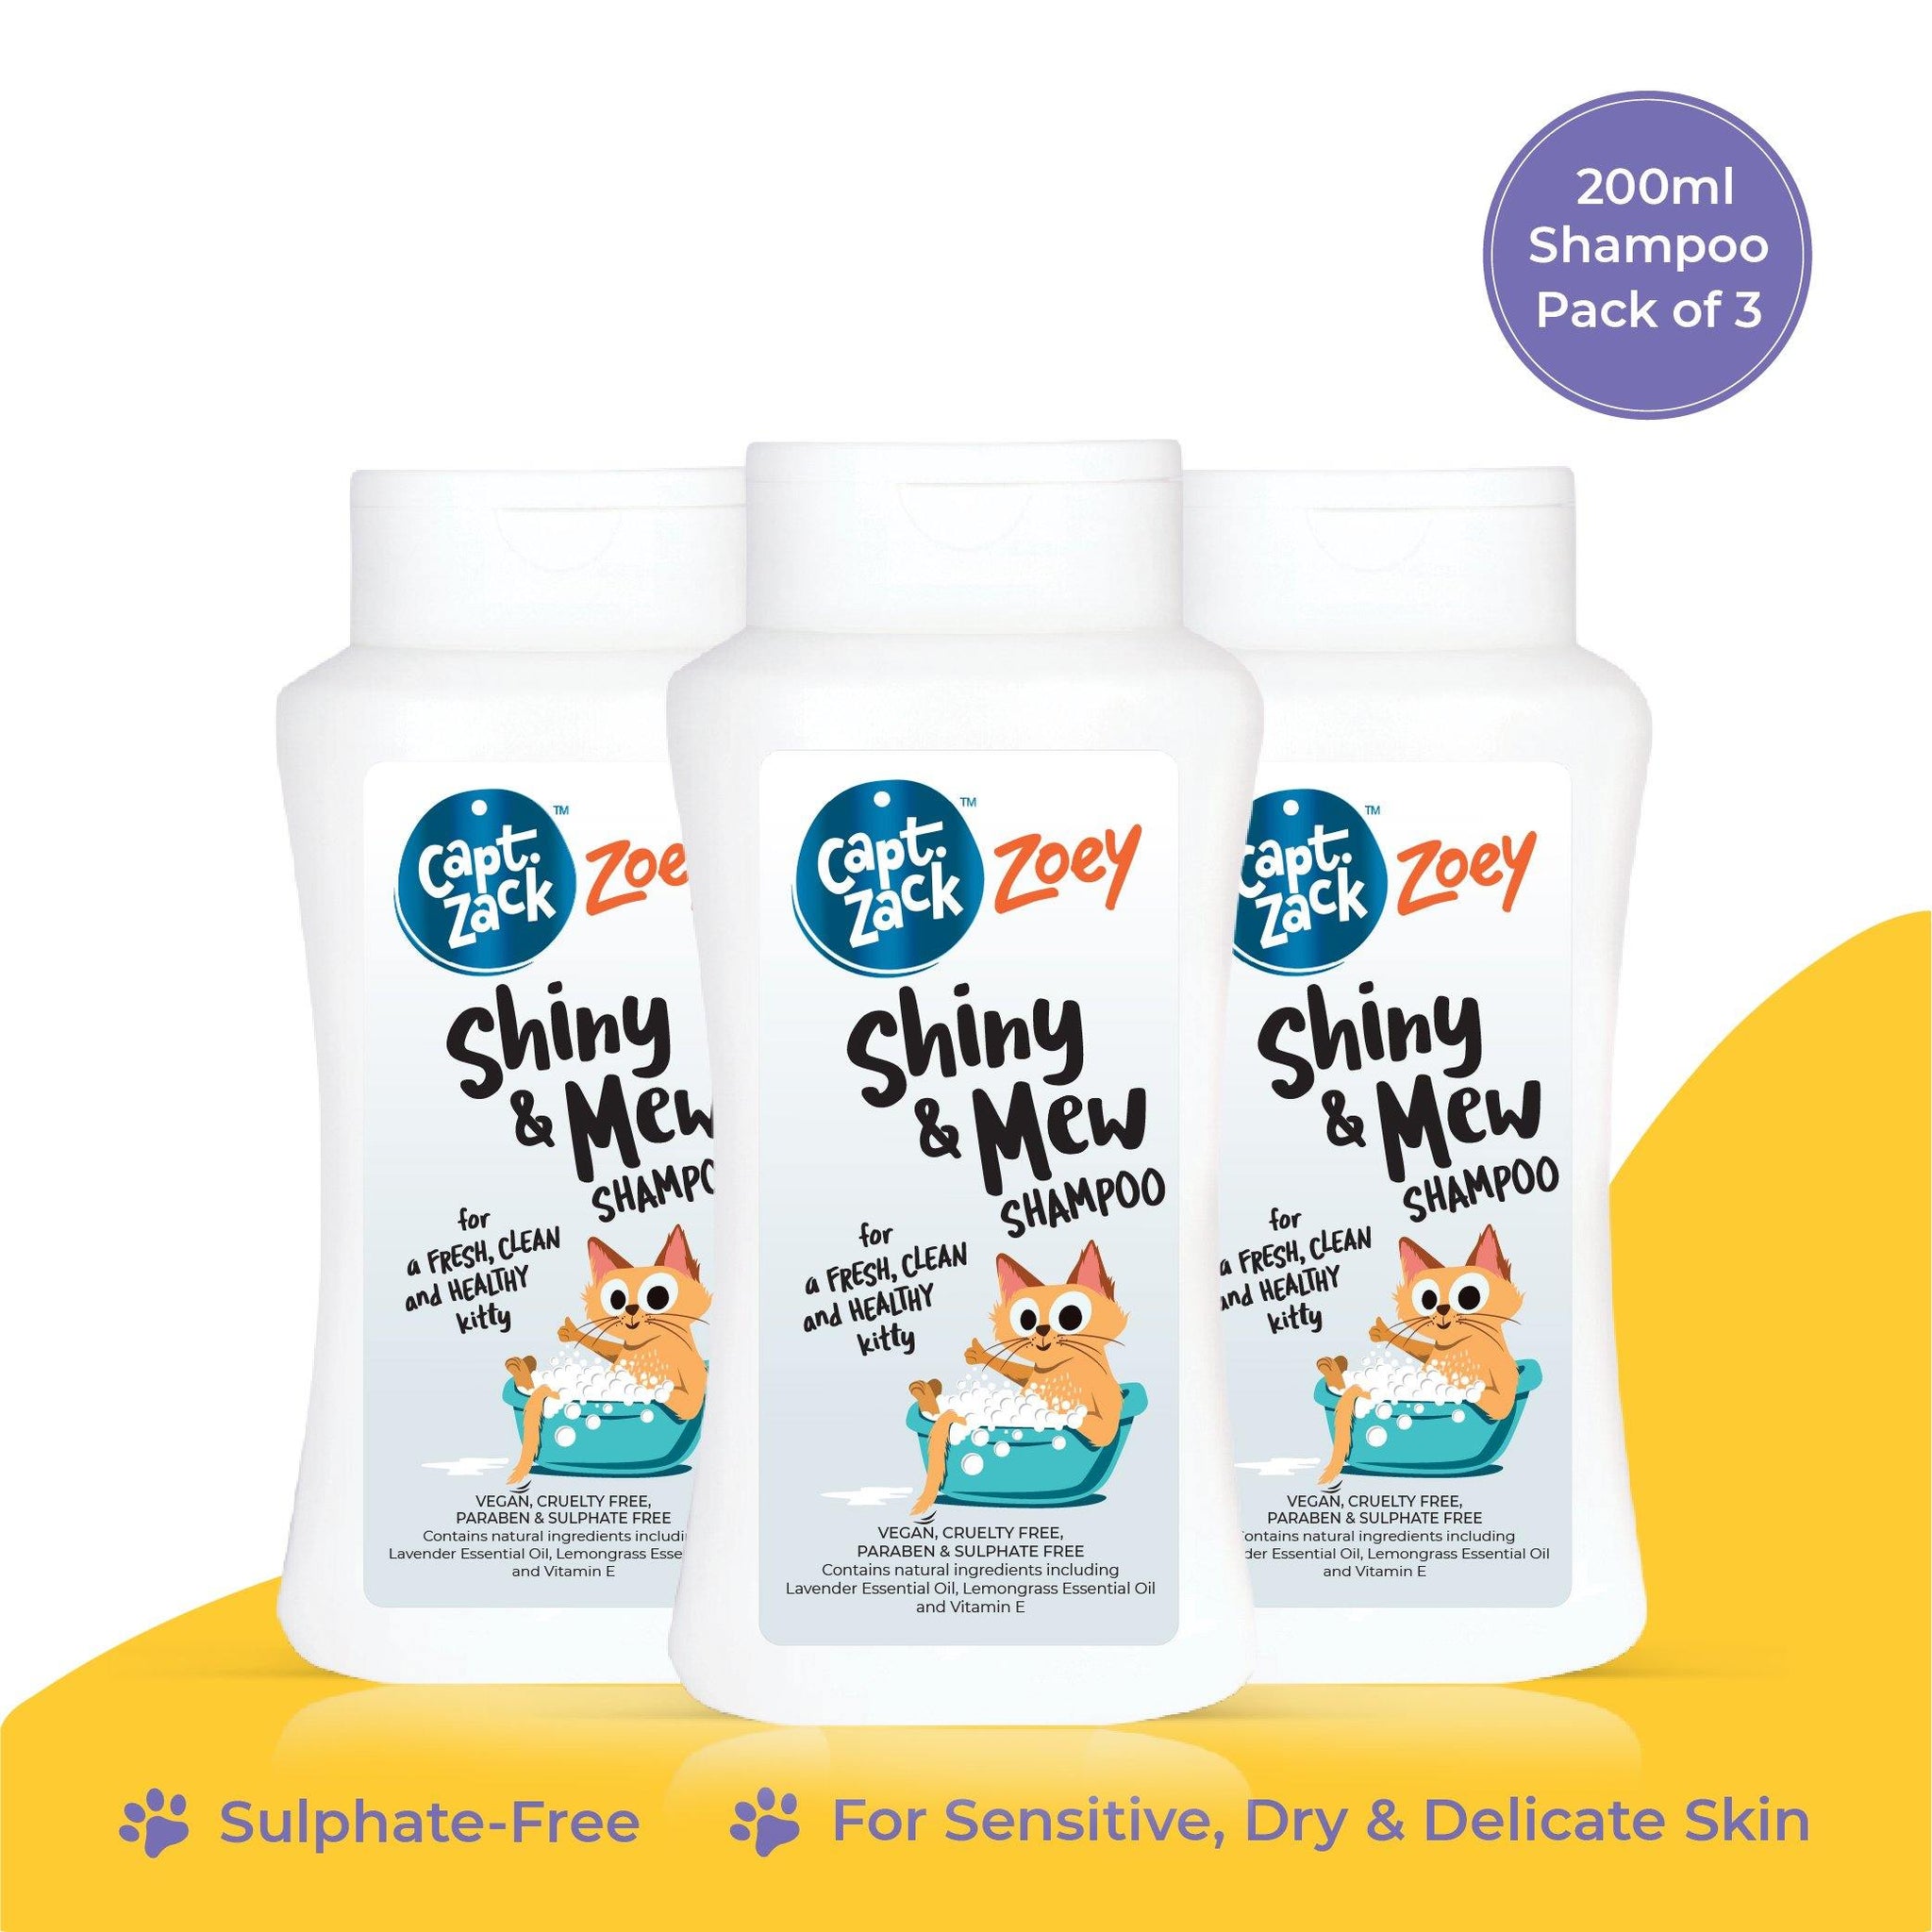 Zoey Shiny & Mew Shampoo 200ml Pawesome Care Pack of 3 - Captain Zack